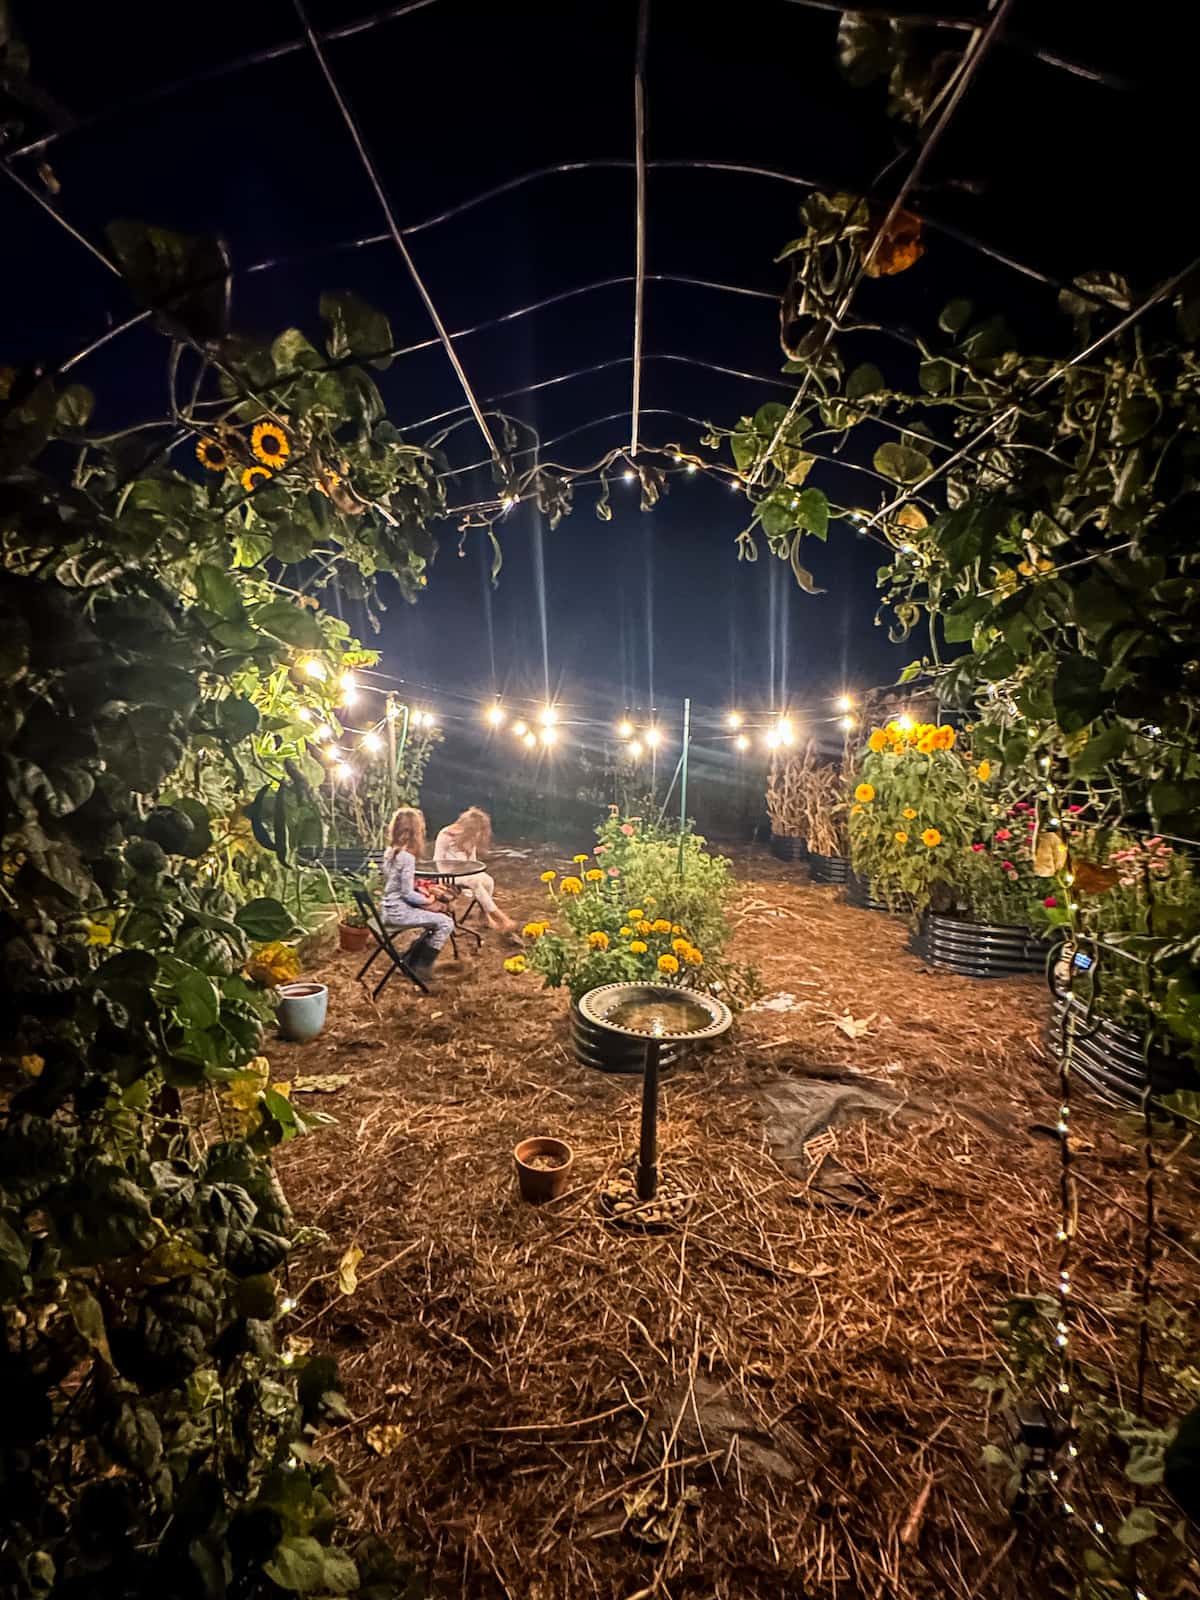 girls sitting on chairs in the garden with string lights overhead at night.